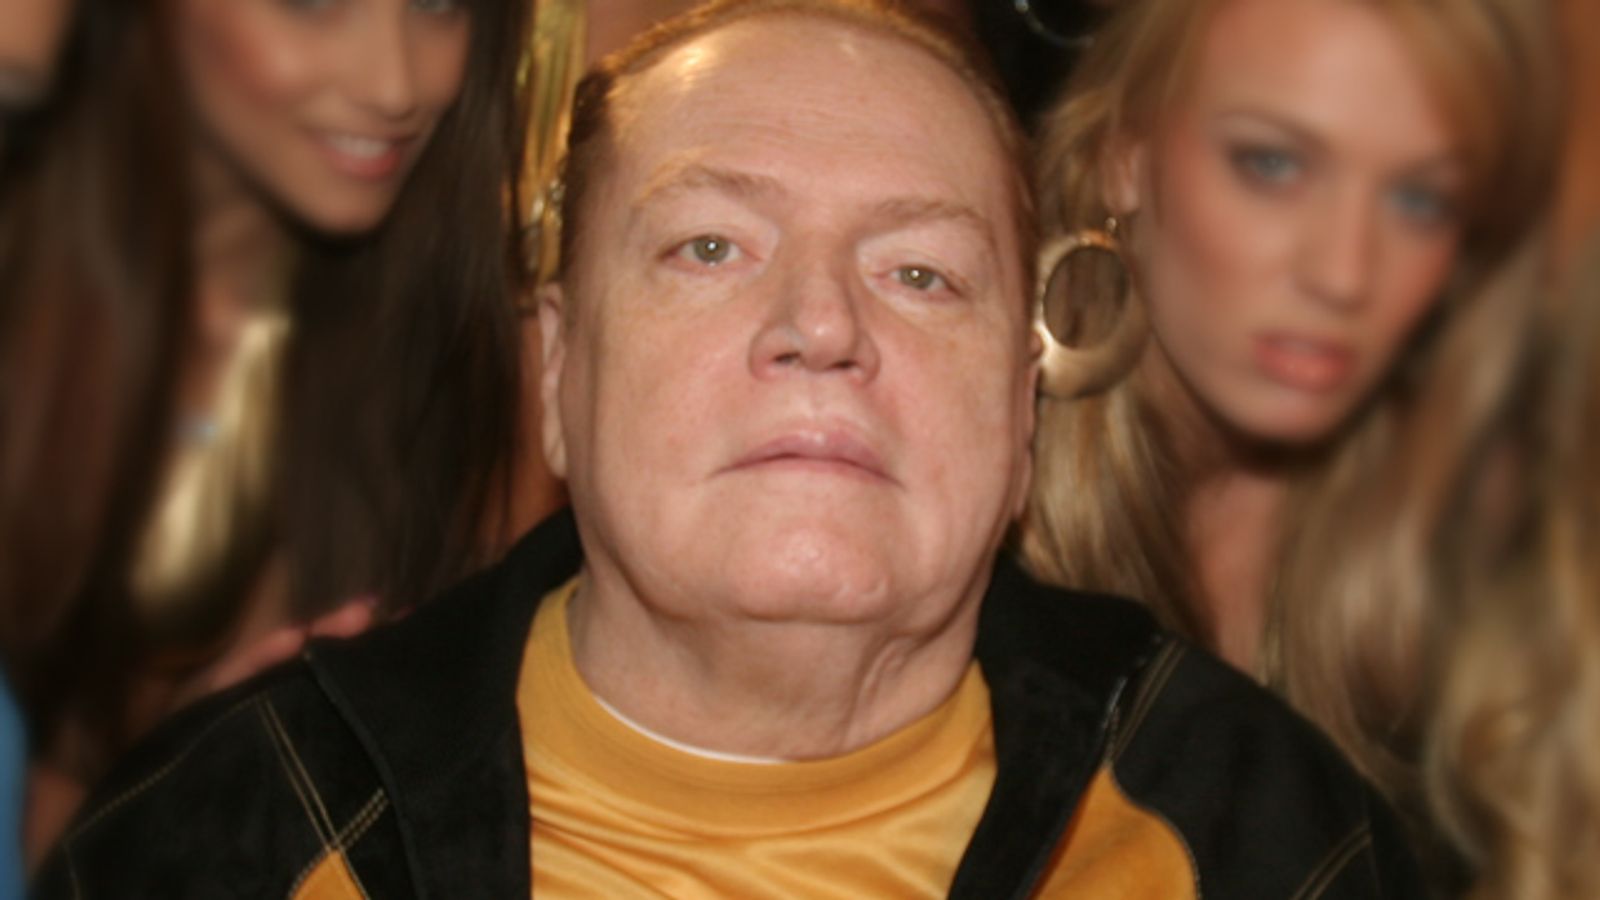 Larry Flynt Wins Summary Judgment Against Nephews In Trademark Case